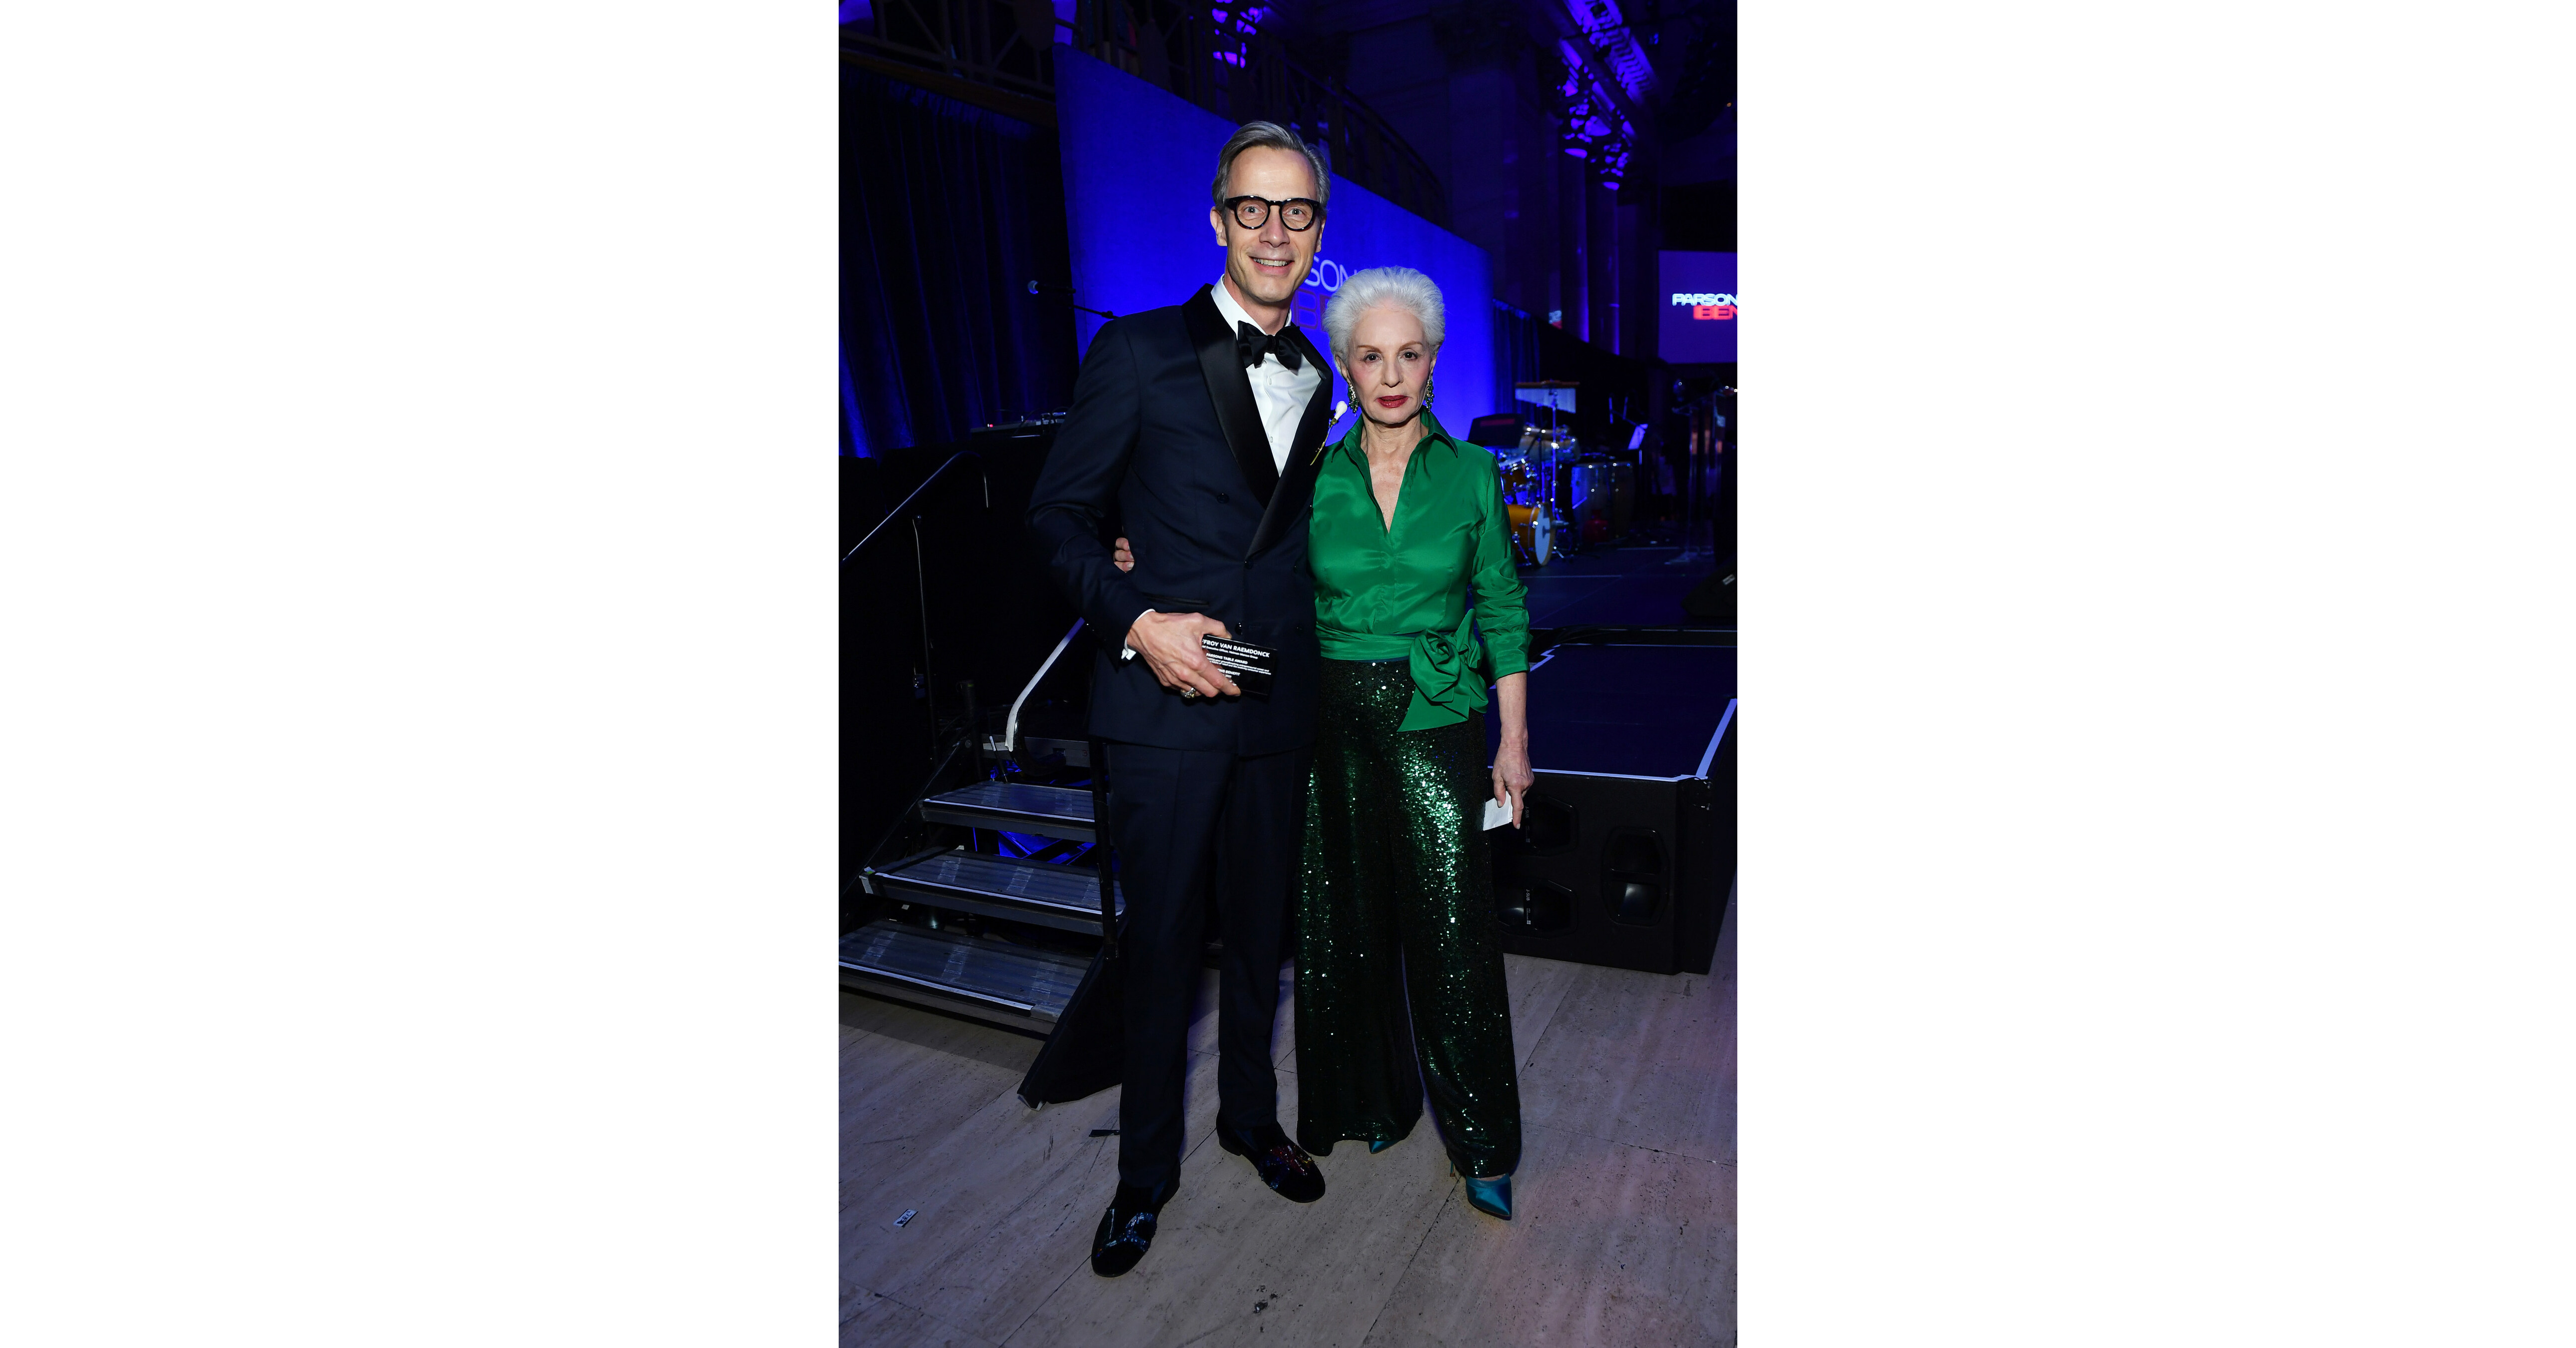 Neiman Marcus Group CEO Geoffroy van Raemdonck Honored at the 74th Annual  Parsons Benefit